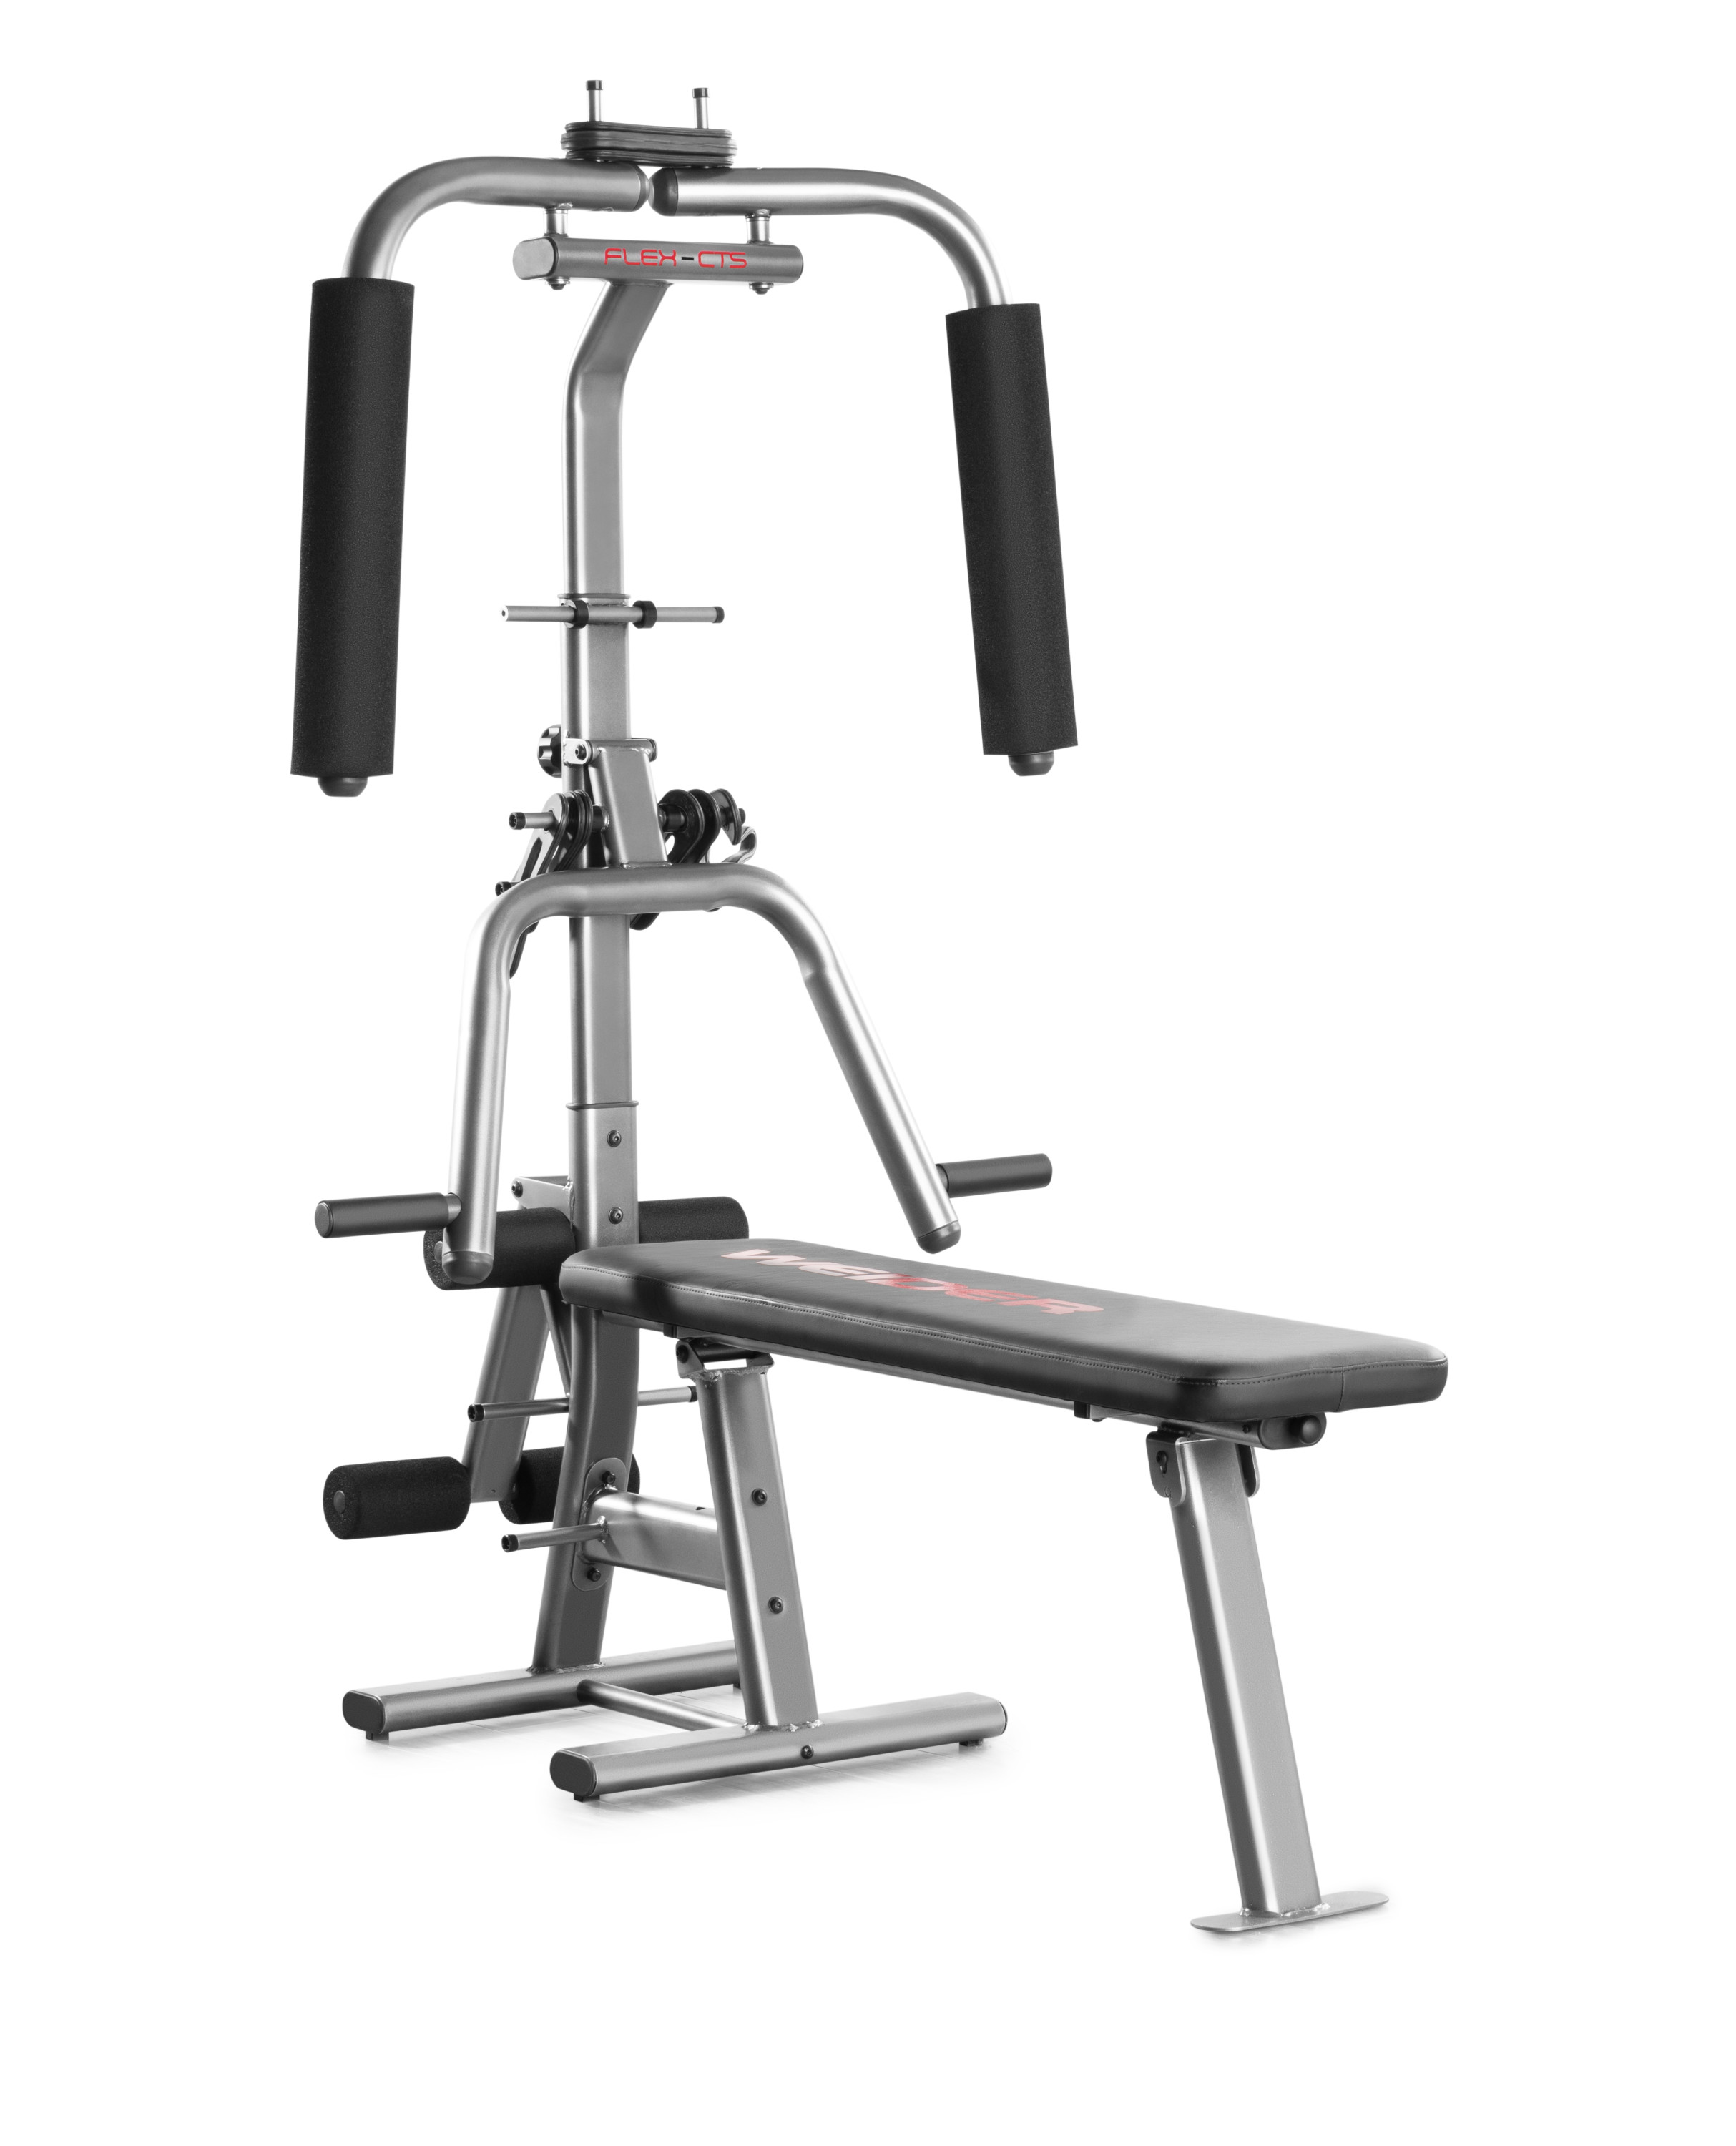 Weider Flex CTS Home Gym System with 14 Resistance Bands and Professionally-Designed Excercise Chart - image 1 of 11